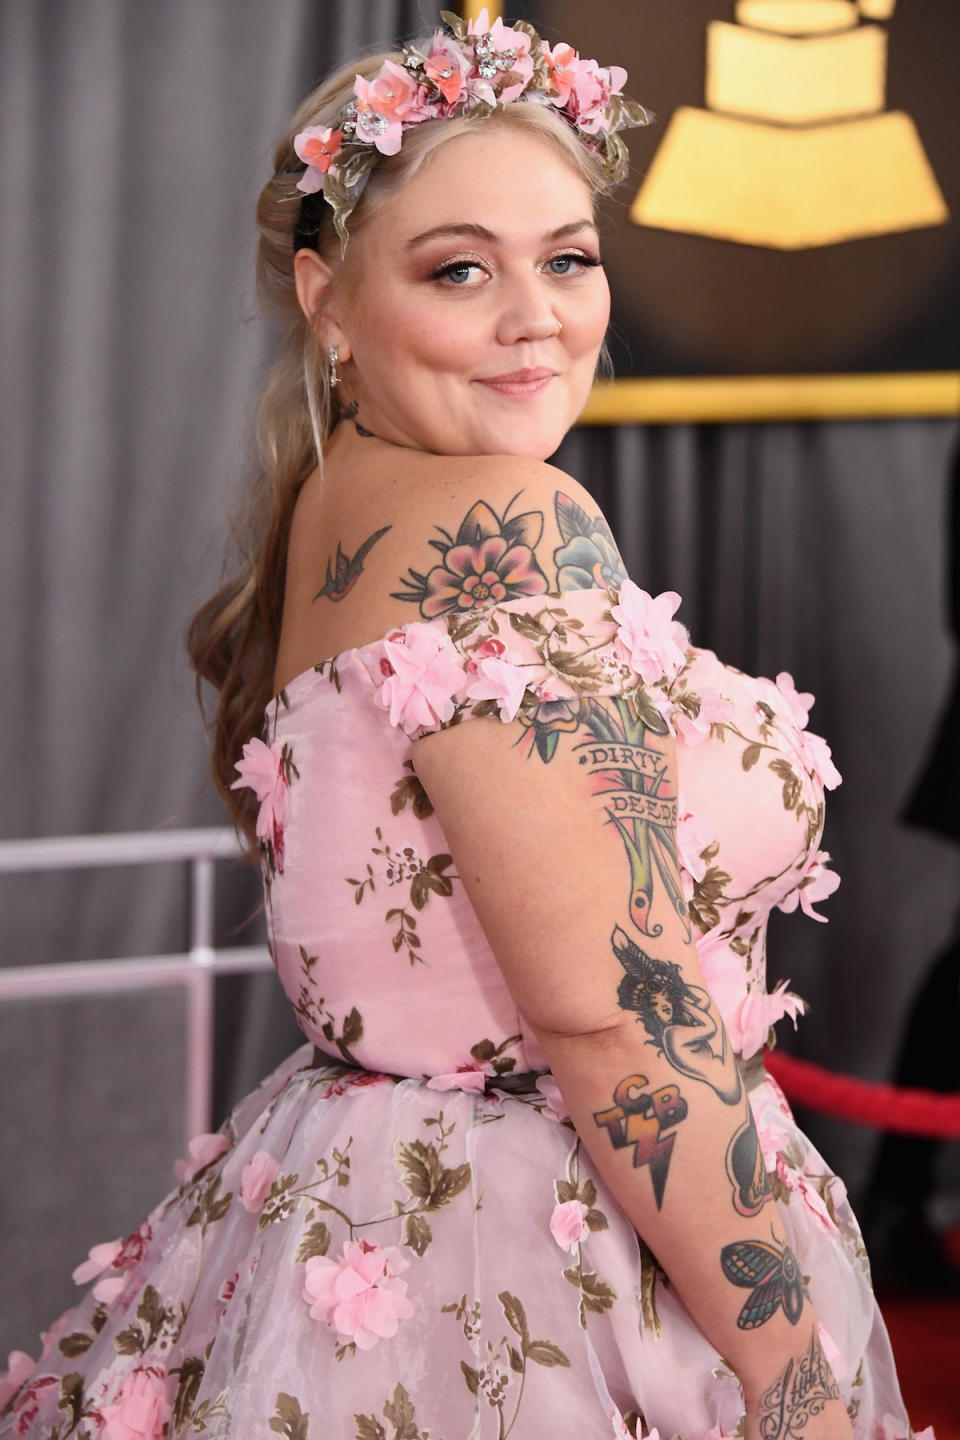 <p>The singer’s floral tattoos perfectly complemented her flower crown and ruffled dress. (Photo: Getty Images) </p>